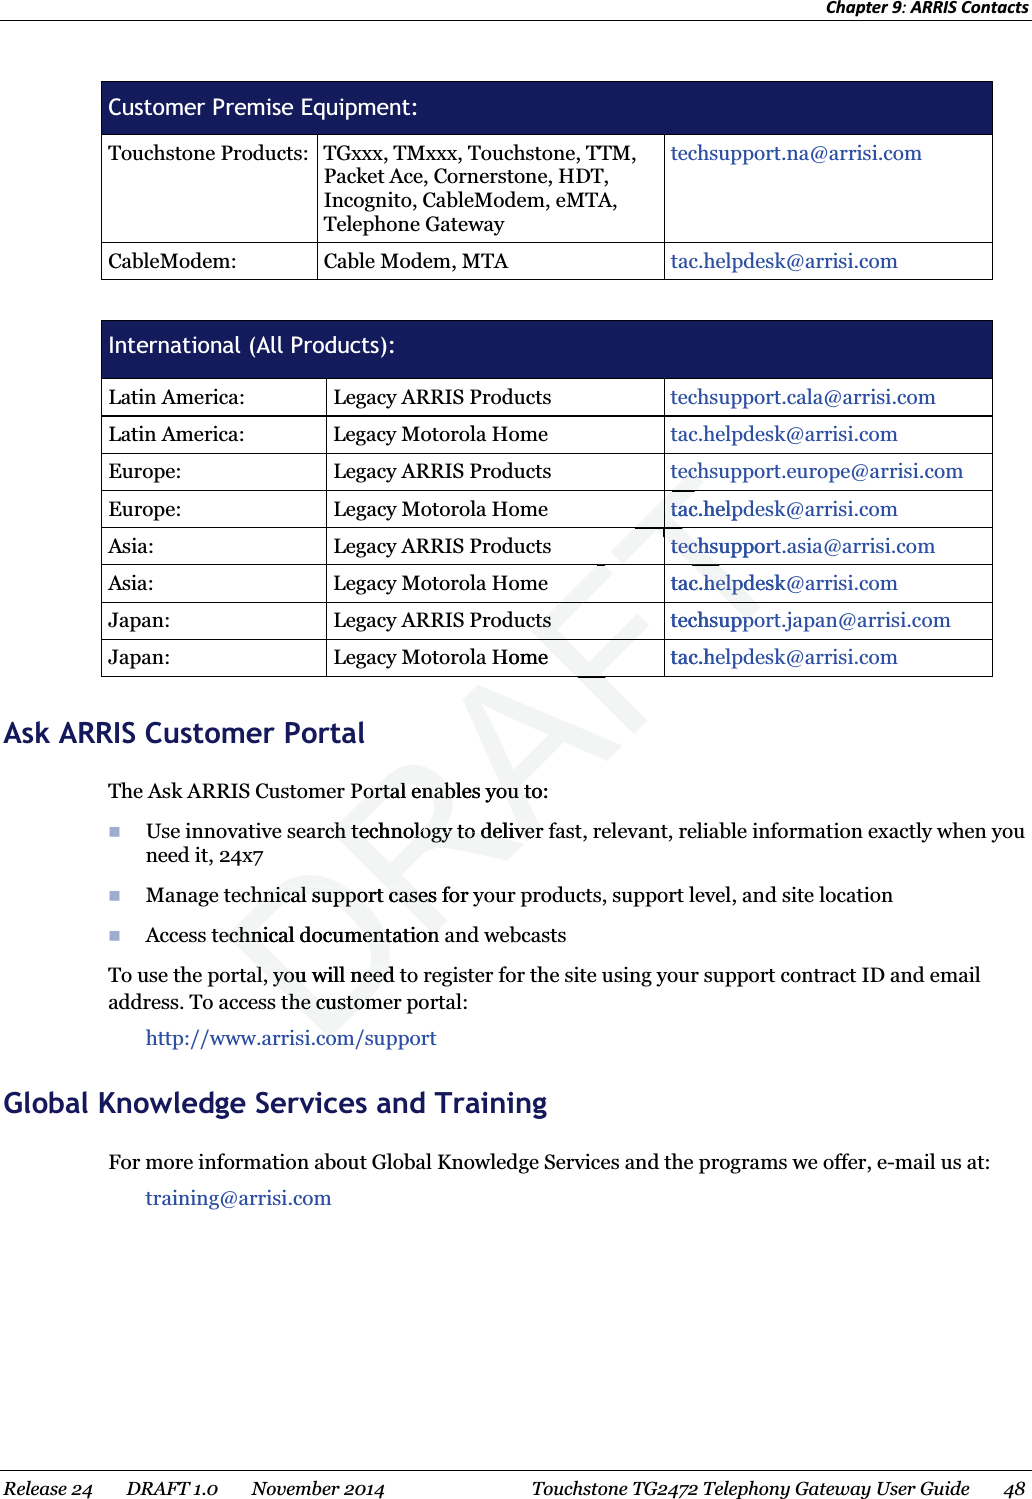 Chapter 9: ARRIS Contacts   Customer Premise Equipment: Touchstone Products:  TGxxx, TMxxx, Touchstone, TTM, Packet Ace, Cornerstone, HDT, Incognito, CableModem, eMTA, Telephone Gateway techsupport.na@arrisi.com CableModem: Cable Modem, MTA  tac.helpdesk@arrisi.com  International (All Products): Latin America:  Legacy ARRIS Products  techsupport.cala@arrisi.com Latin America:  Legacy Motorola Home  tac.helpdesk@arrisi.com Europe:  Legacy ARRIS Products  techsupport.europe@arrisi.com Europe:  Legacy Motorola Home  tac.helpdesk@arrisi.com Asia:  Legacy ARRIS Products  techsupport.asia@arrisi.com Asia:  Legacy Motorola Home  tac.helpdesk@arrisi.com Japan:  Legacy ARRIS Products  techsupport.japan@arrisi.com Japan:  Legacy Motorola Home  tac.helpdesk@arrisi.com   Ask ARRIS Customer Portal The Ask ARRIS Customer Portal enables you to:  Use innovative search technology to deliver fast, relevant, reliable information exactly when you need it, 24x7  Manage technical support cases for your products, support level, and site location  Access technical documentation and webcasts To use the portal, you will need to register for the site using your support contract ID and email address. To access the customer portal: http://www.arrisi.com/support Global Knowledge Services and Training For more information about Global Knowledge Services and the programs we offer, e-mail us at: training@arrisi.com  Release 24    DRAFT 1.0    November 2014  Touchstone TG2472 Telephony Gateway User Guide    48  echechtac.helptaTTtechsupporttechsTTTFTtac.helpdesk@.helpdFTFTFTFTctsctstechsuppoppoFTFTFTFTHometac.heFTFTFTAFFTFFPortal enables you to:Portal enables you trch technology to deliver ch technology to deliverhnical suphnical support cases for yport casesechnical documentation echnical documentation l, you will need tl, you will needthe customthe customcomcom